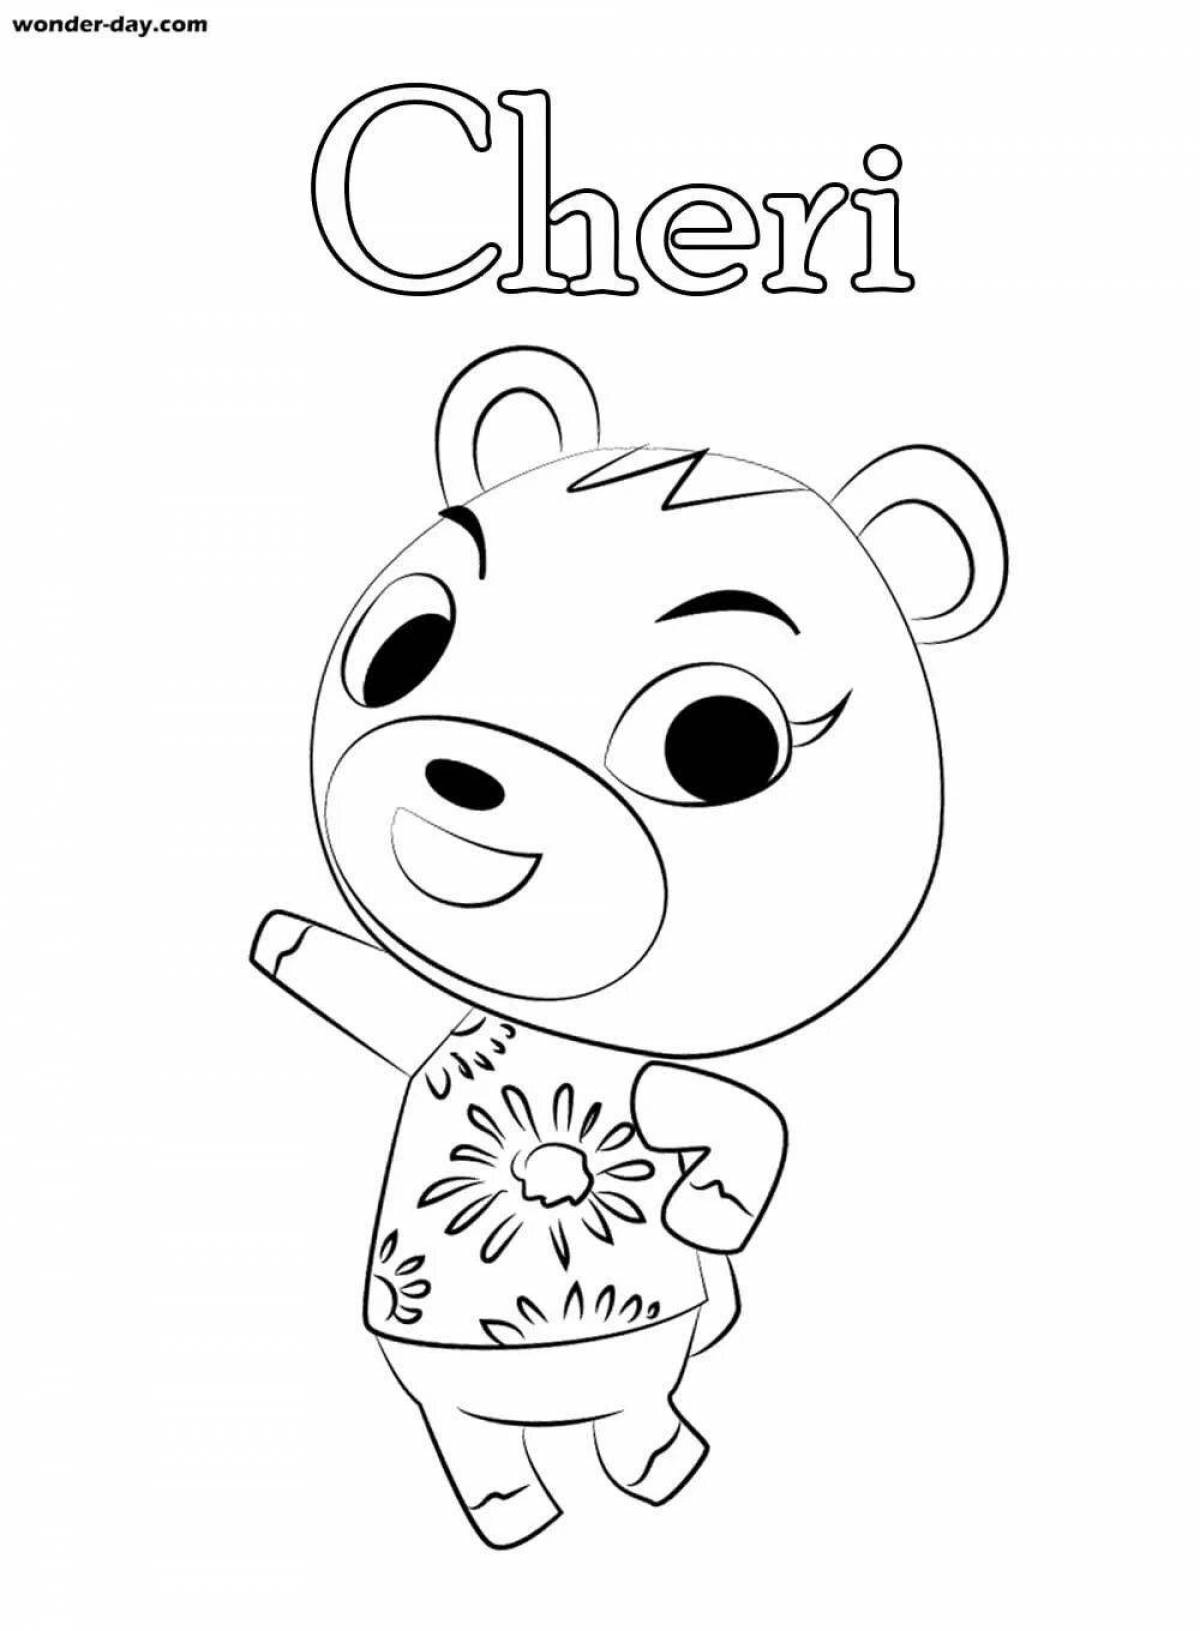 Miracle day coloring page